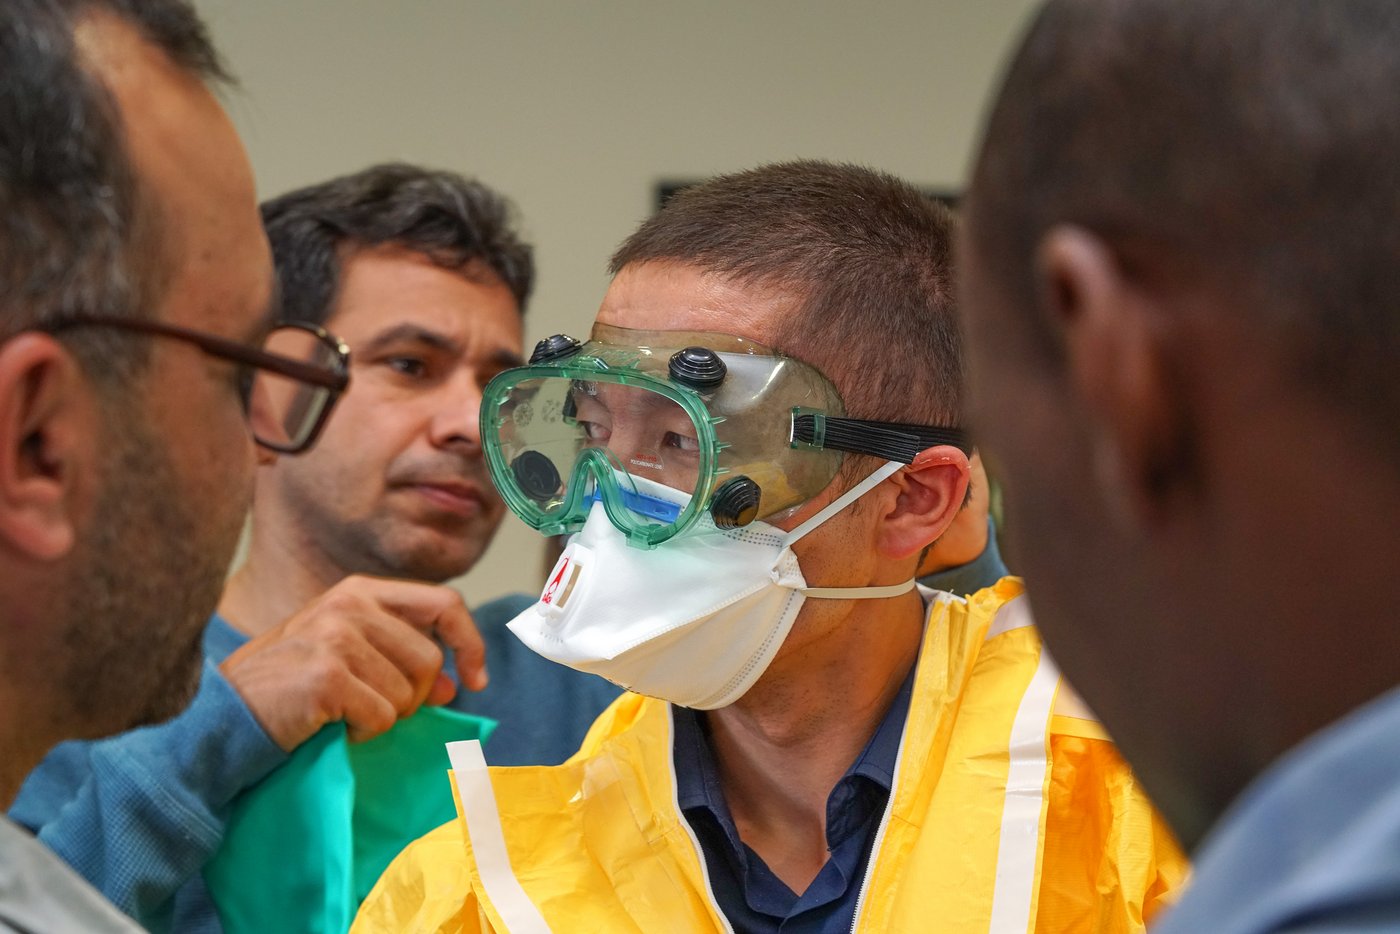 The picture shows several men helping a colleague dress in a personal protective equipment (PPE).